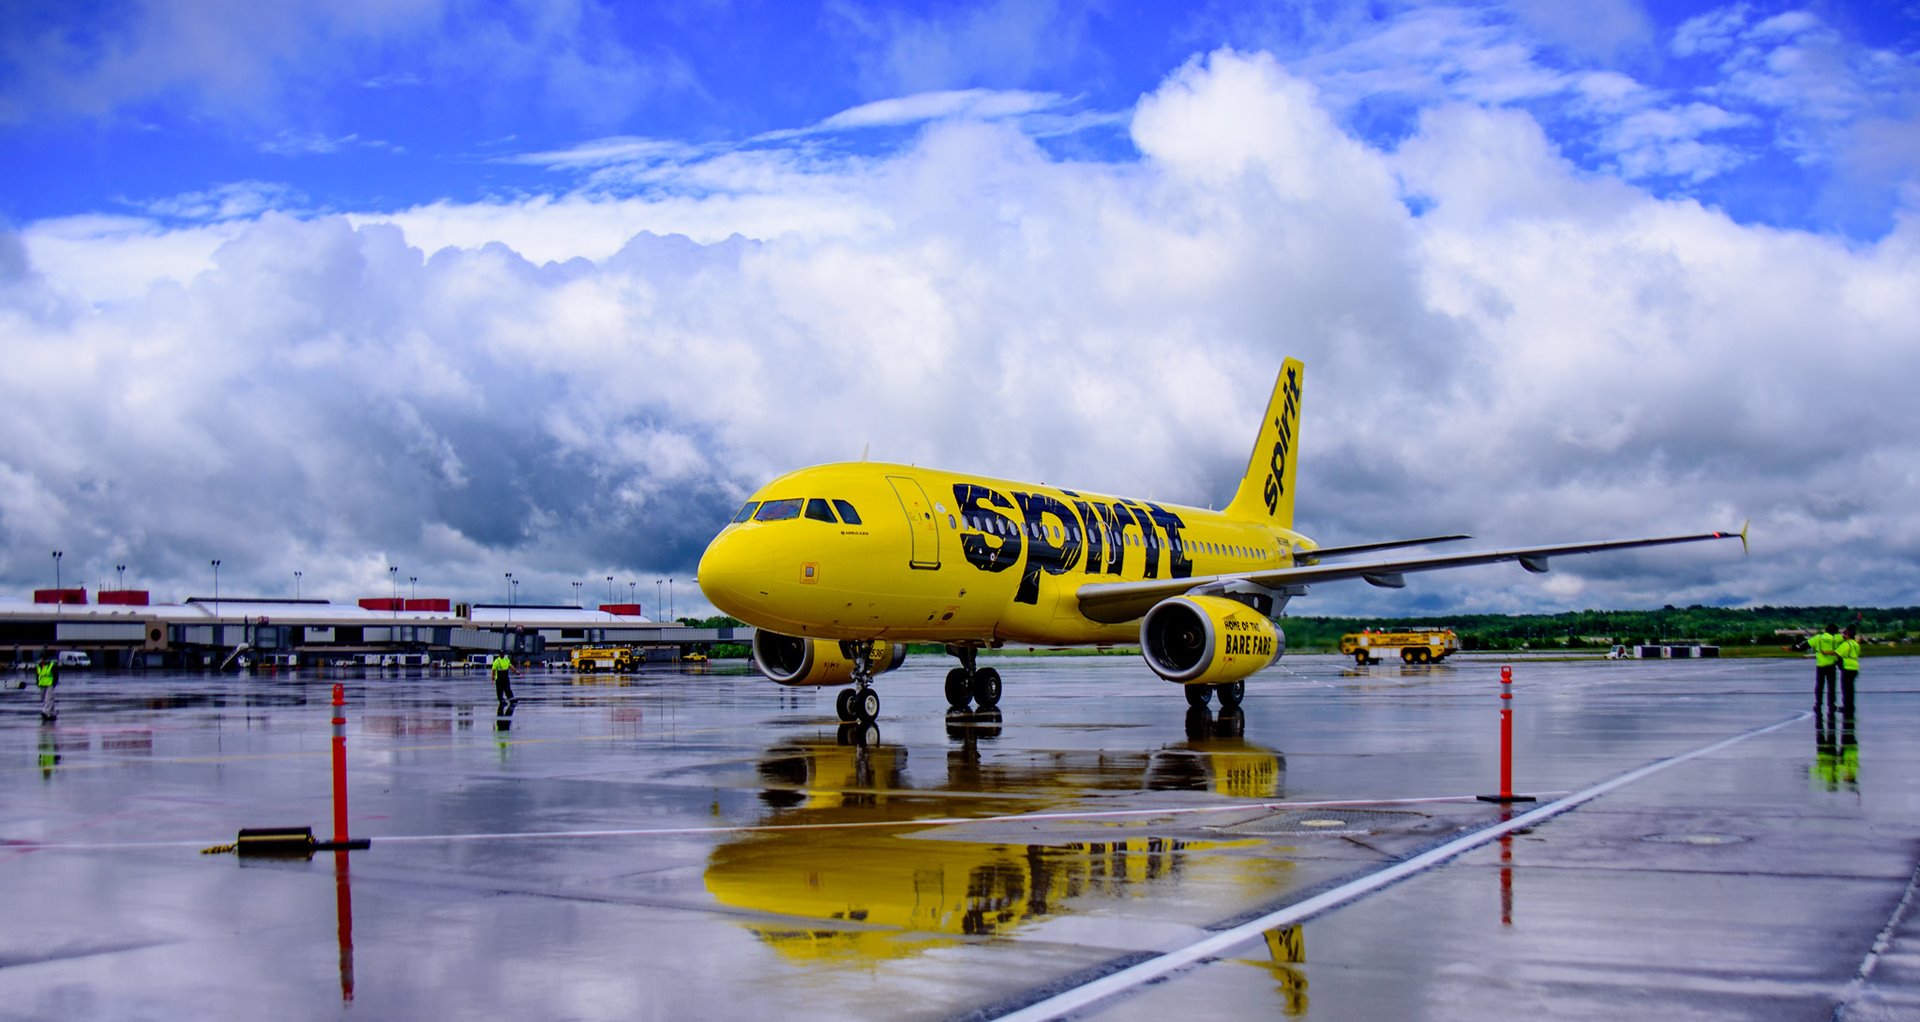 More Go to Mexico! Spirit Airlines Adds New Nonstop Service to Cancun